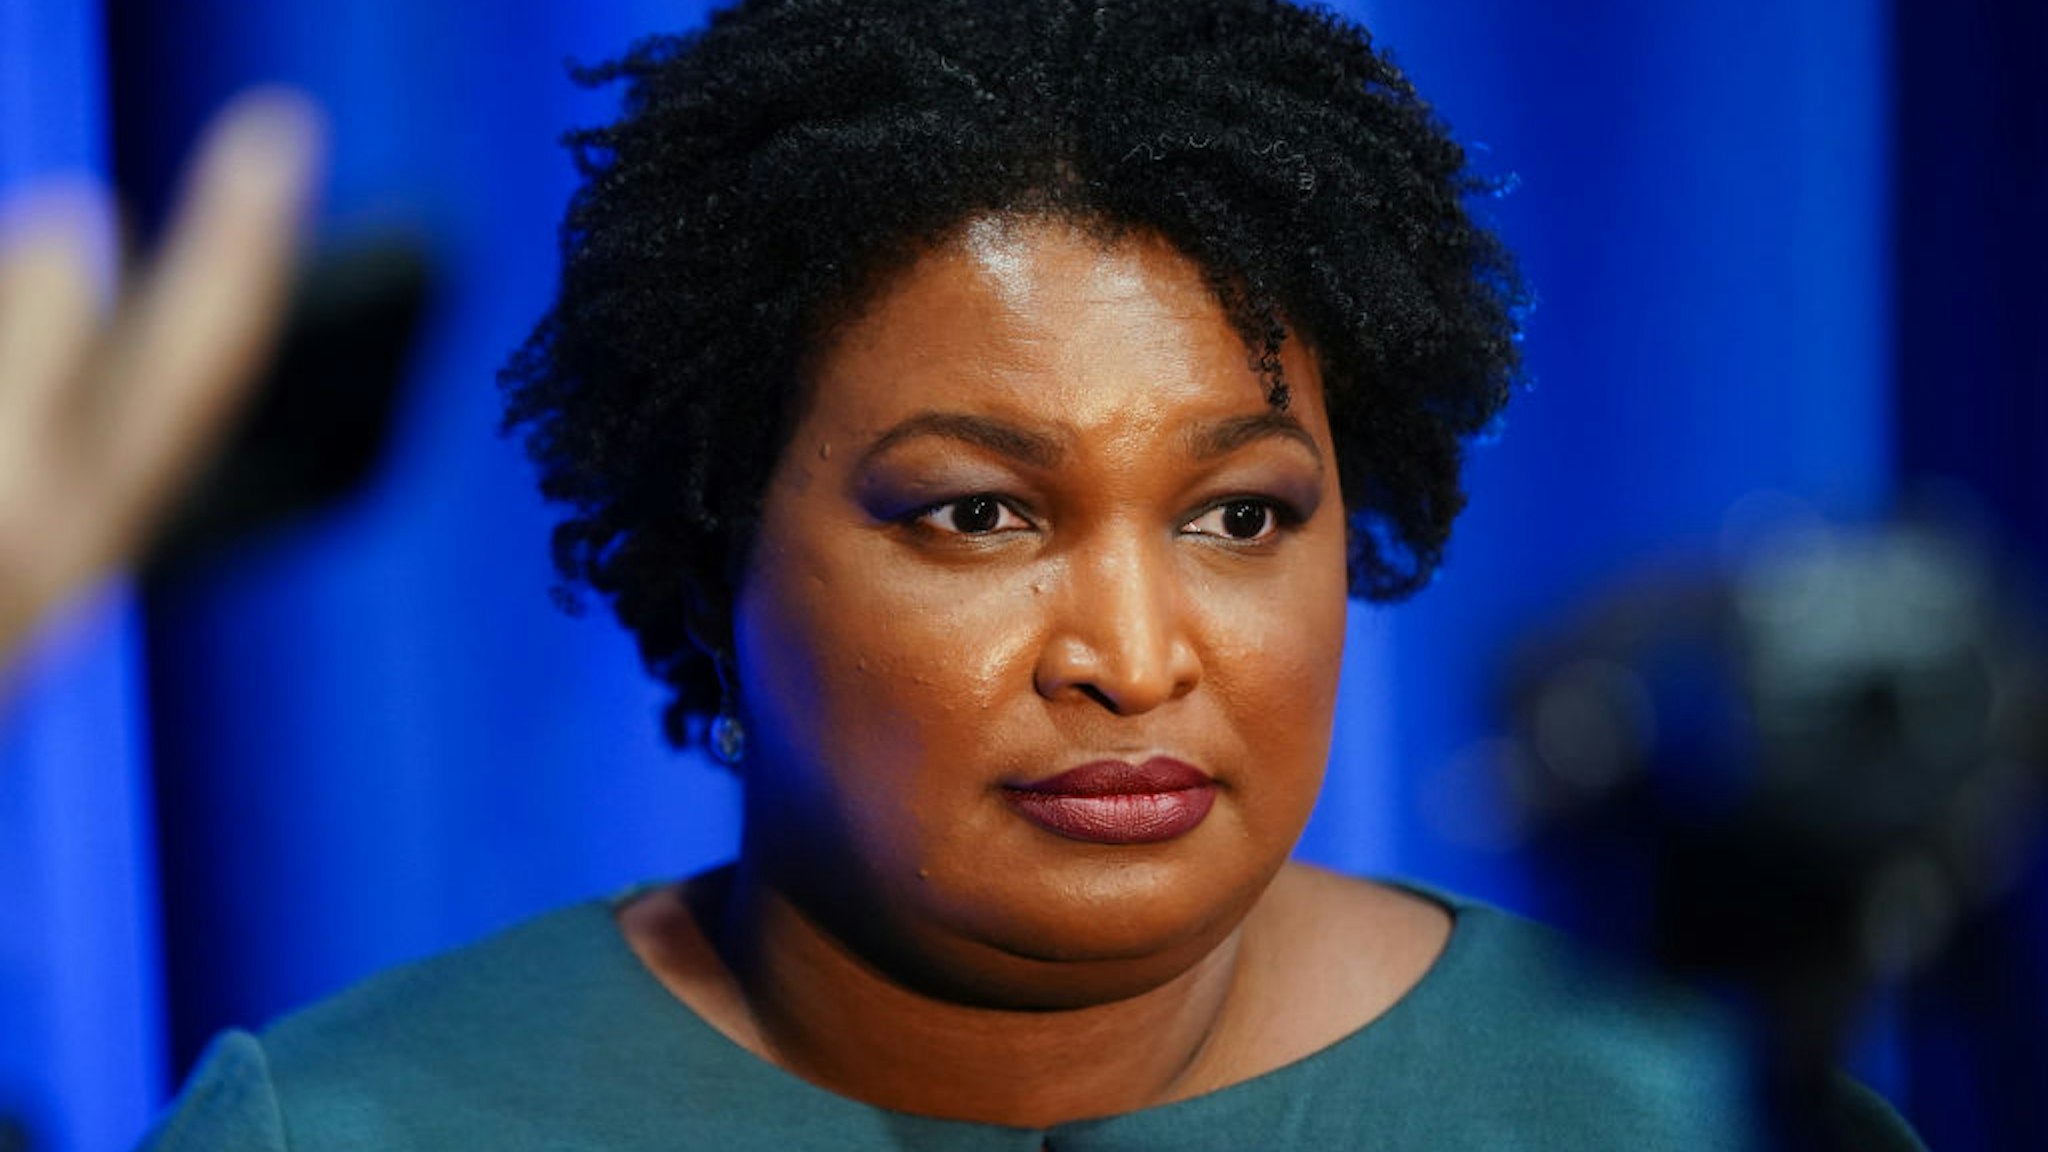 Stacey Abrams, former state Representative from Georgia, listens to questions from members of the media ahead of the Democratic presidential debate in Atlanta, Georgia, U.S., on Wednesday, Nov. 20, 2019.